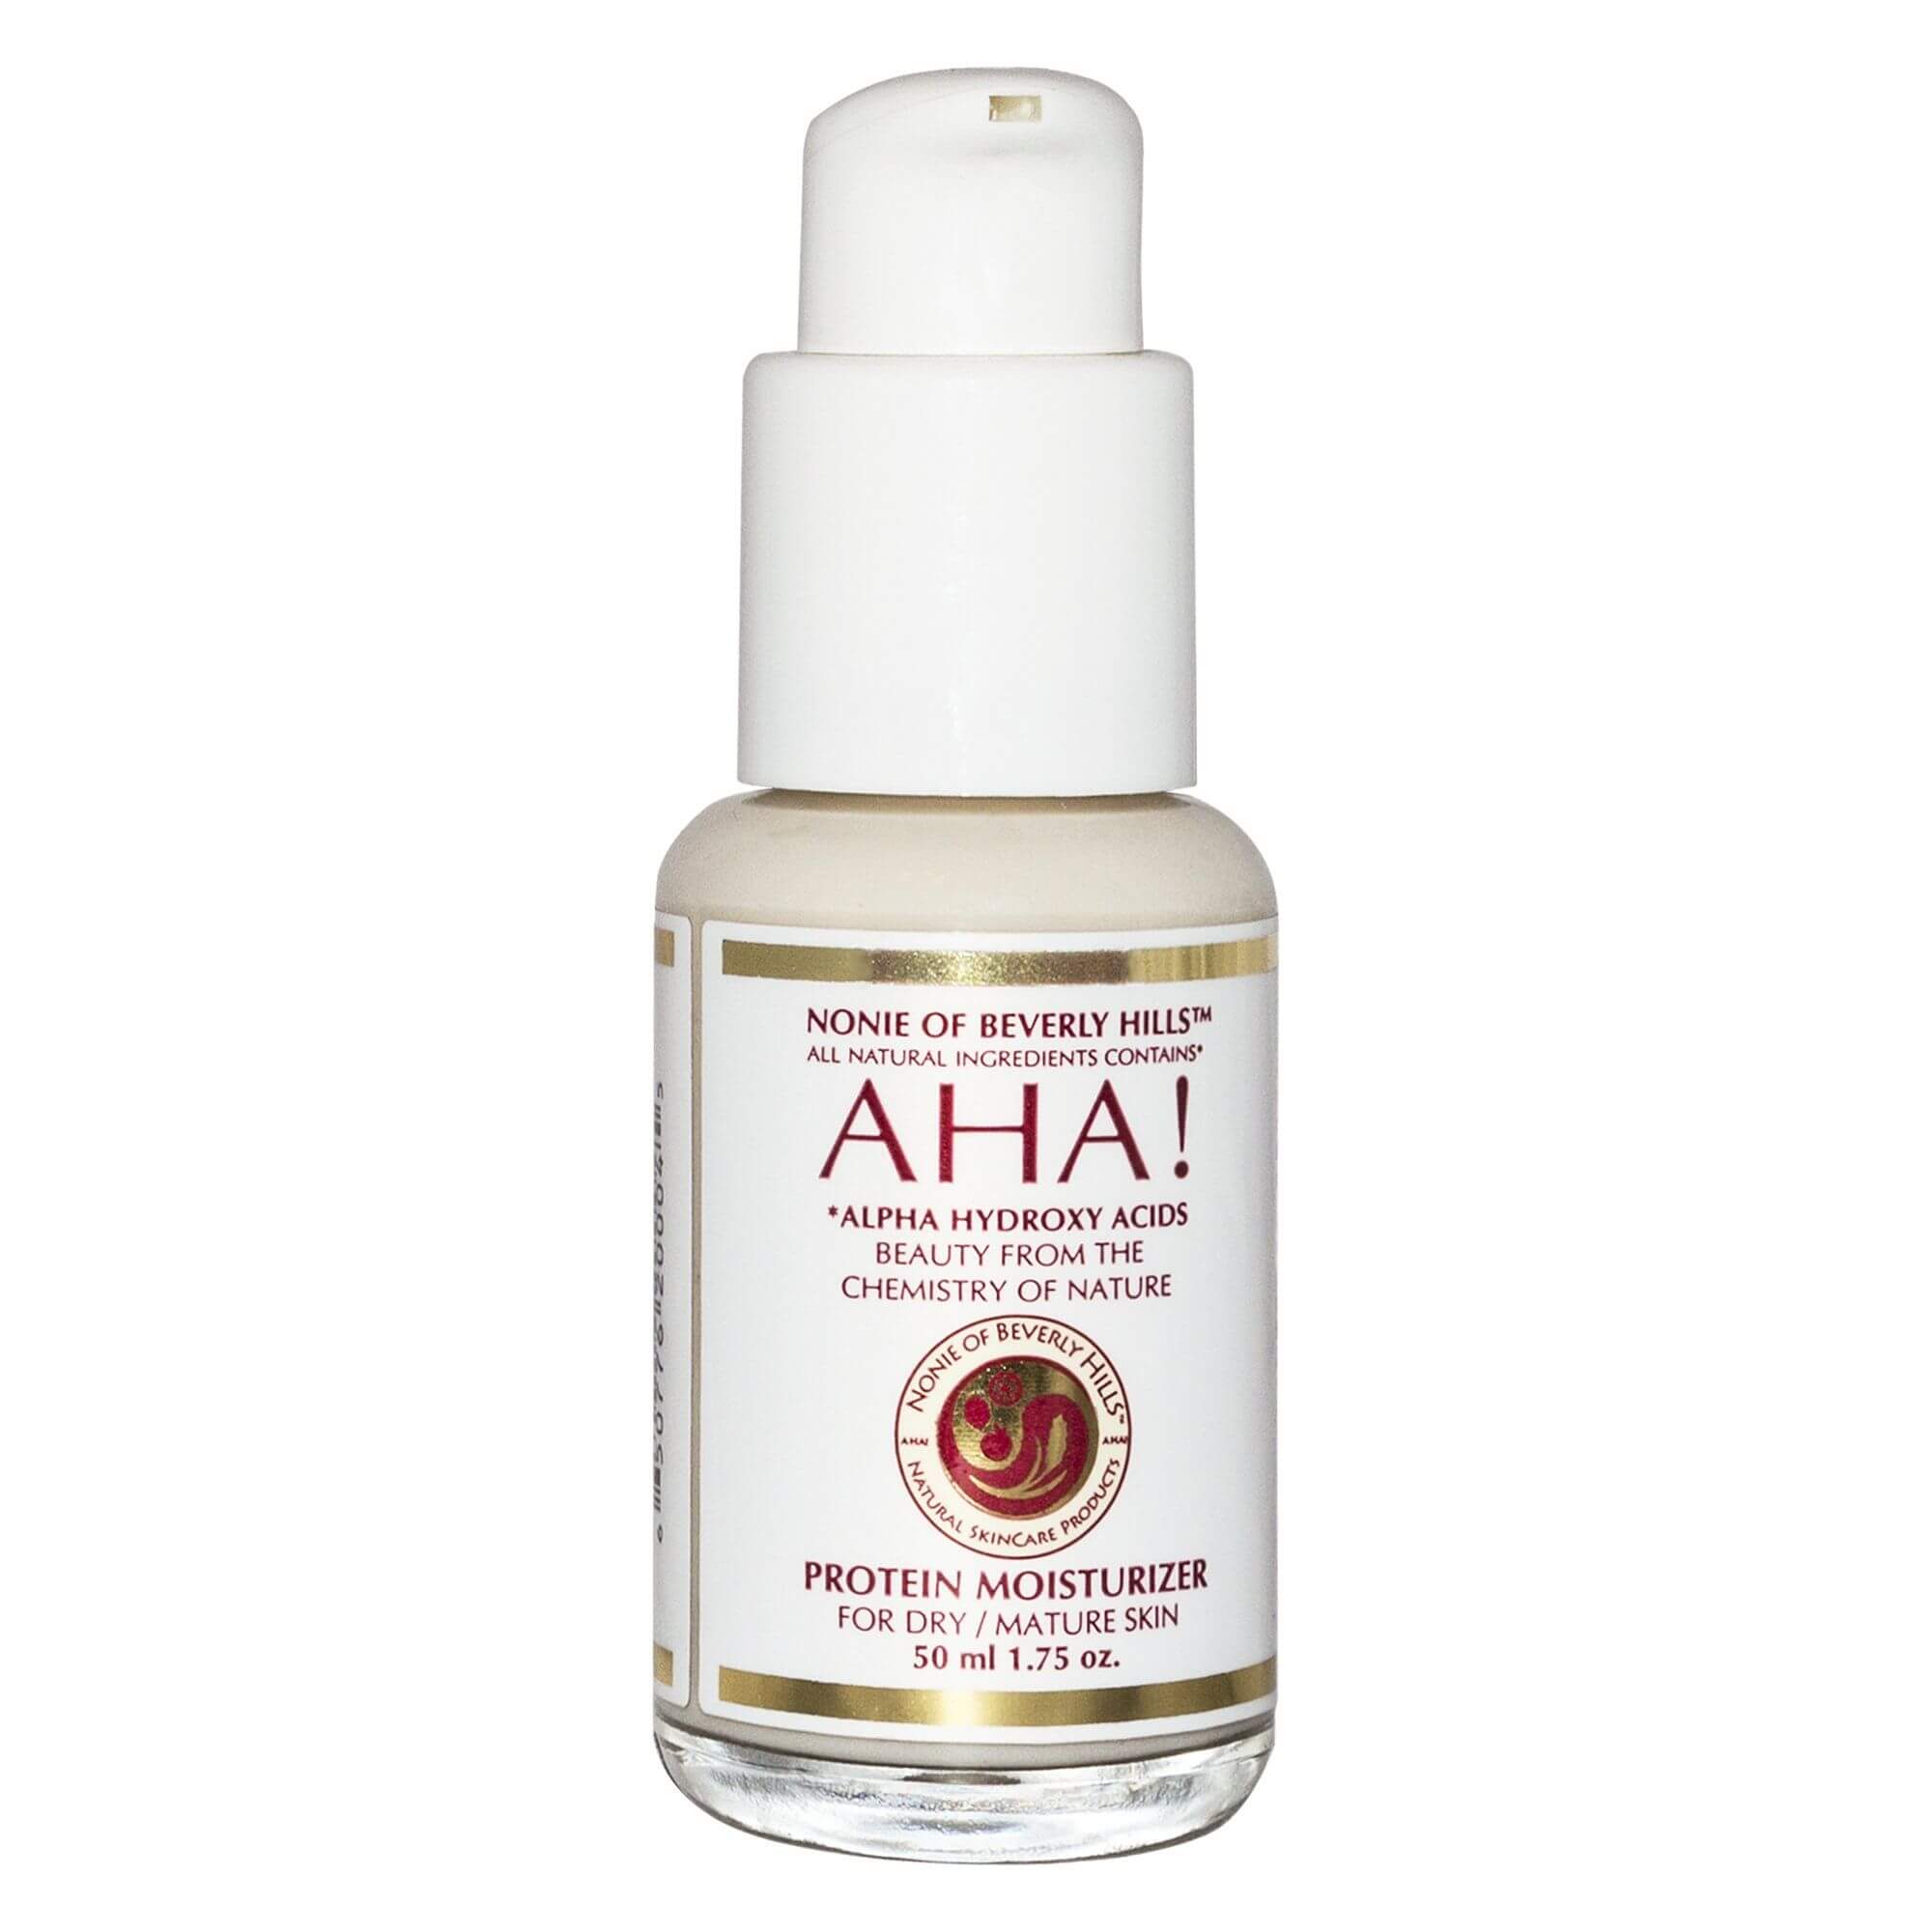 AHA! Protein Moisturizer 1.75 oz - for Dry/Mature Skin - Nonie of Beverly Hills